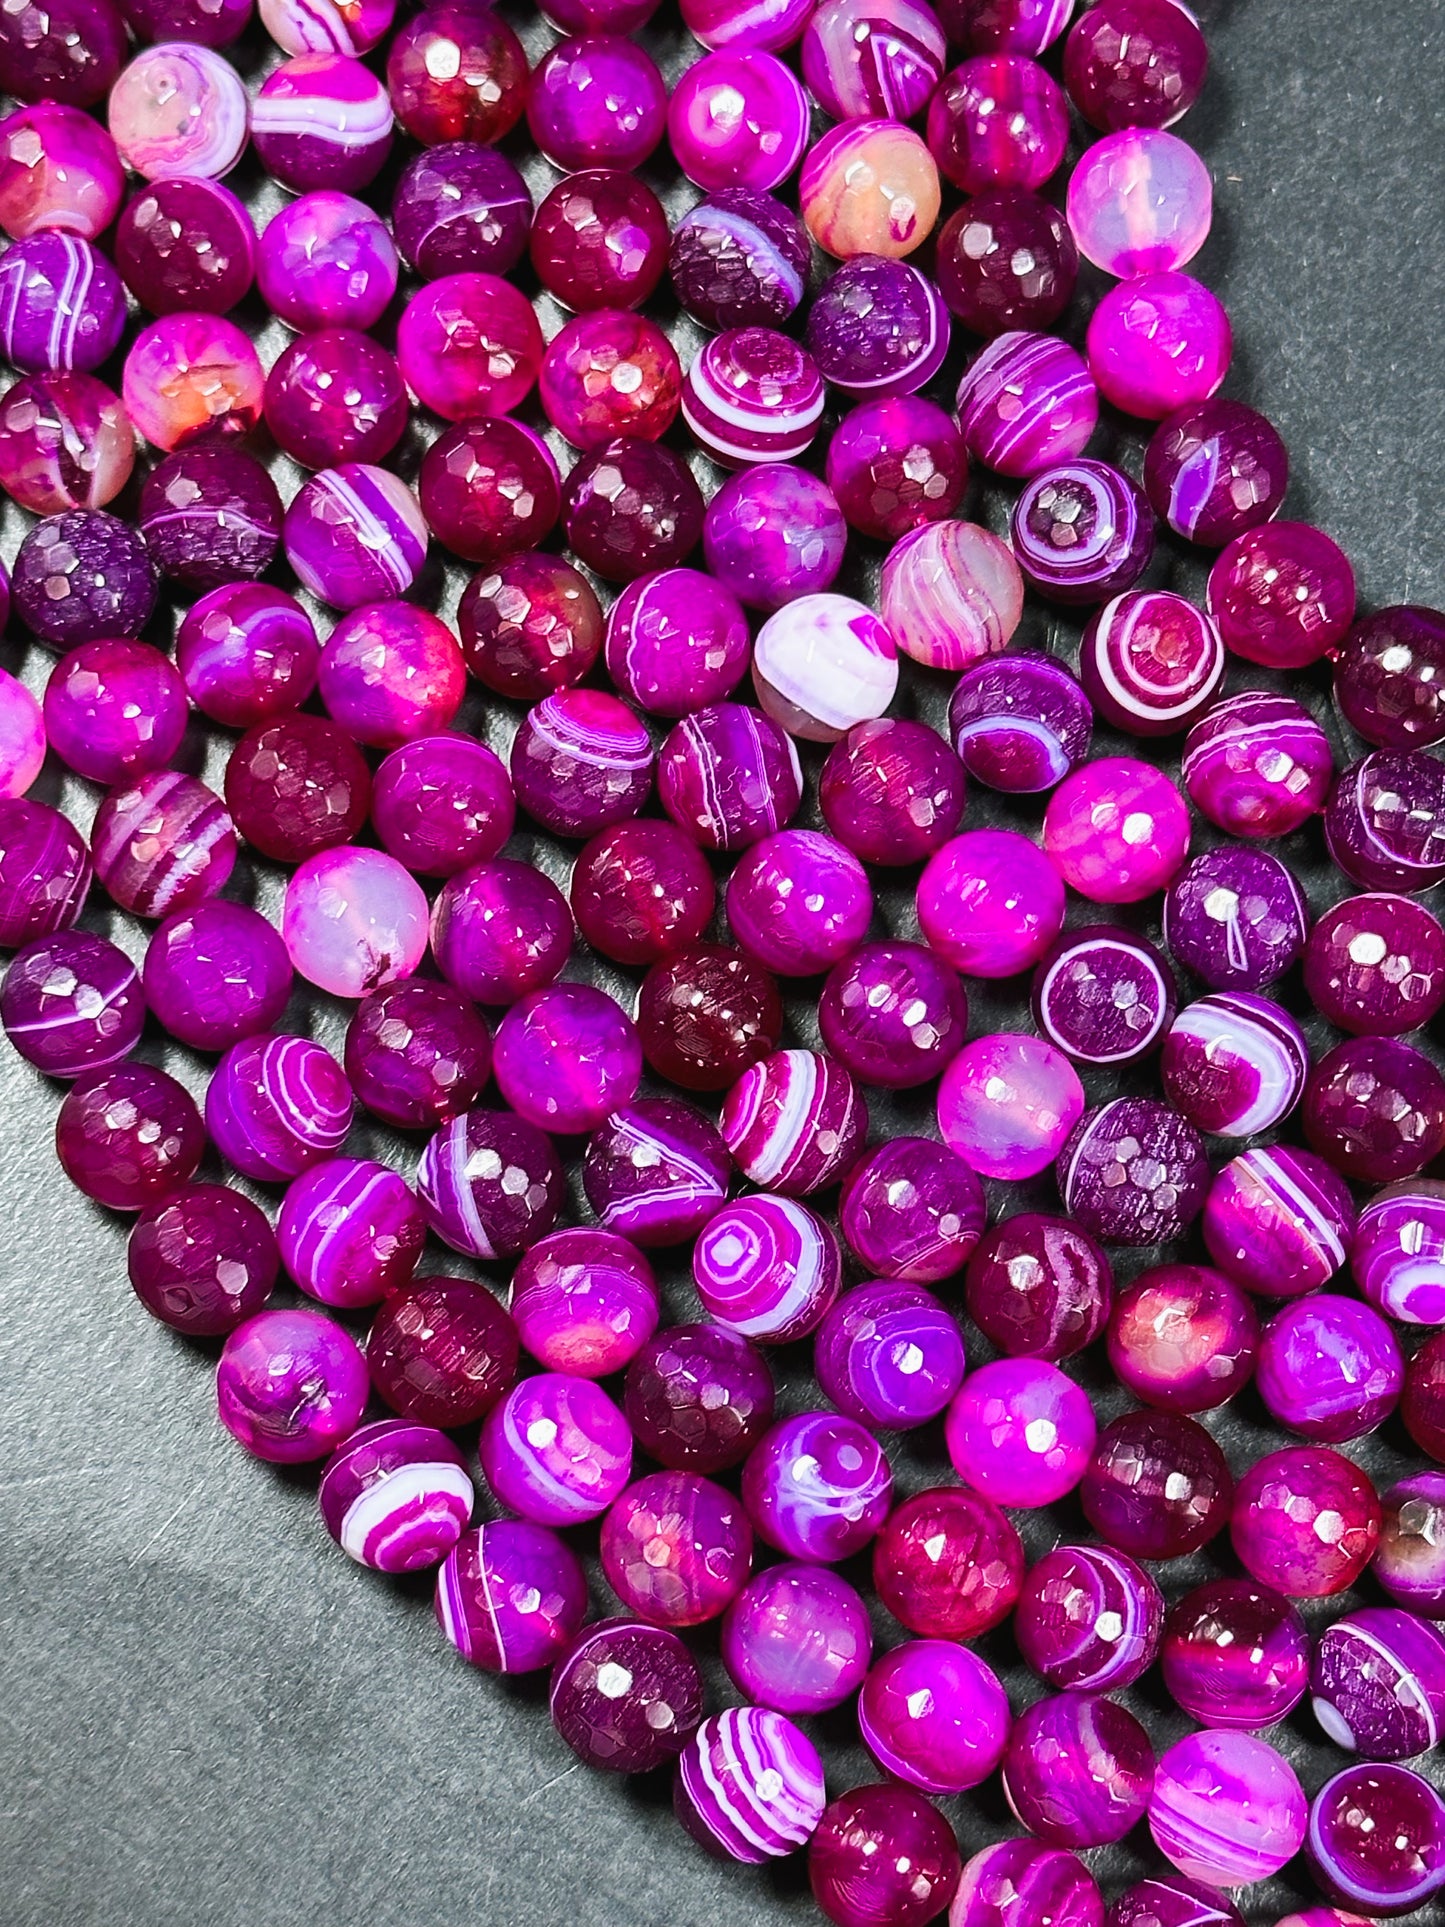 NATURAL Botswana Agate Gemstone Bead Faceted 6mm 8mm 10mm 12mm Round Beads, Beautiful Pink Fuchsia Color Gemstone Bead Full Strand 15.5"